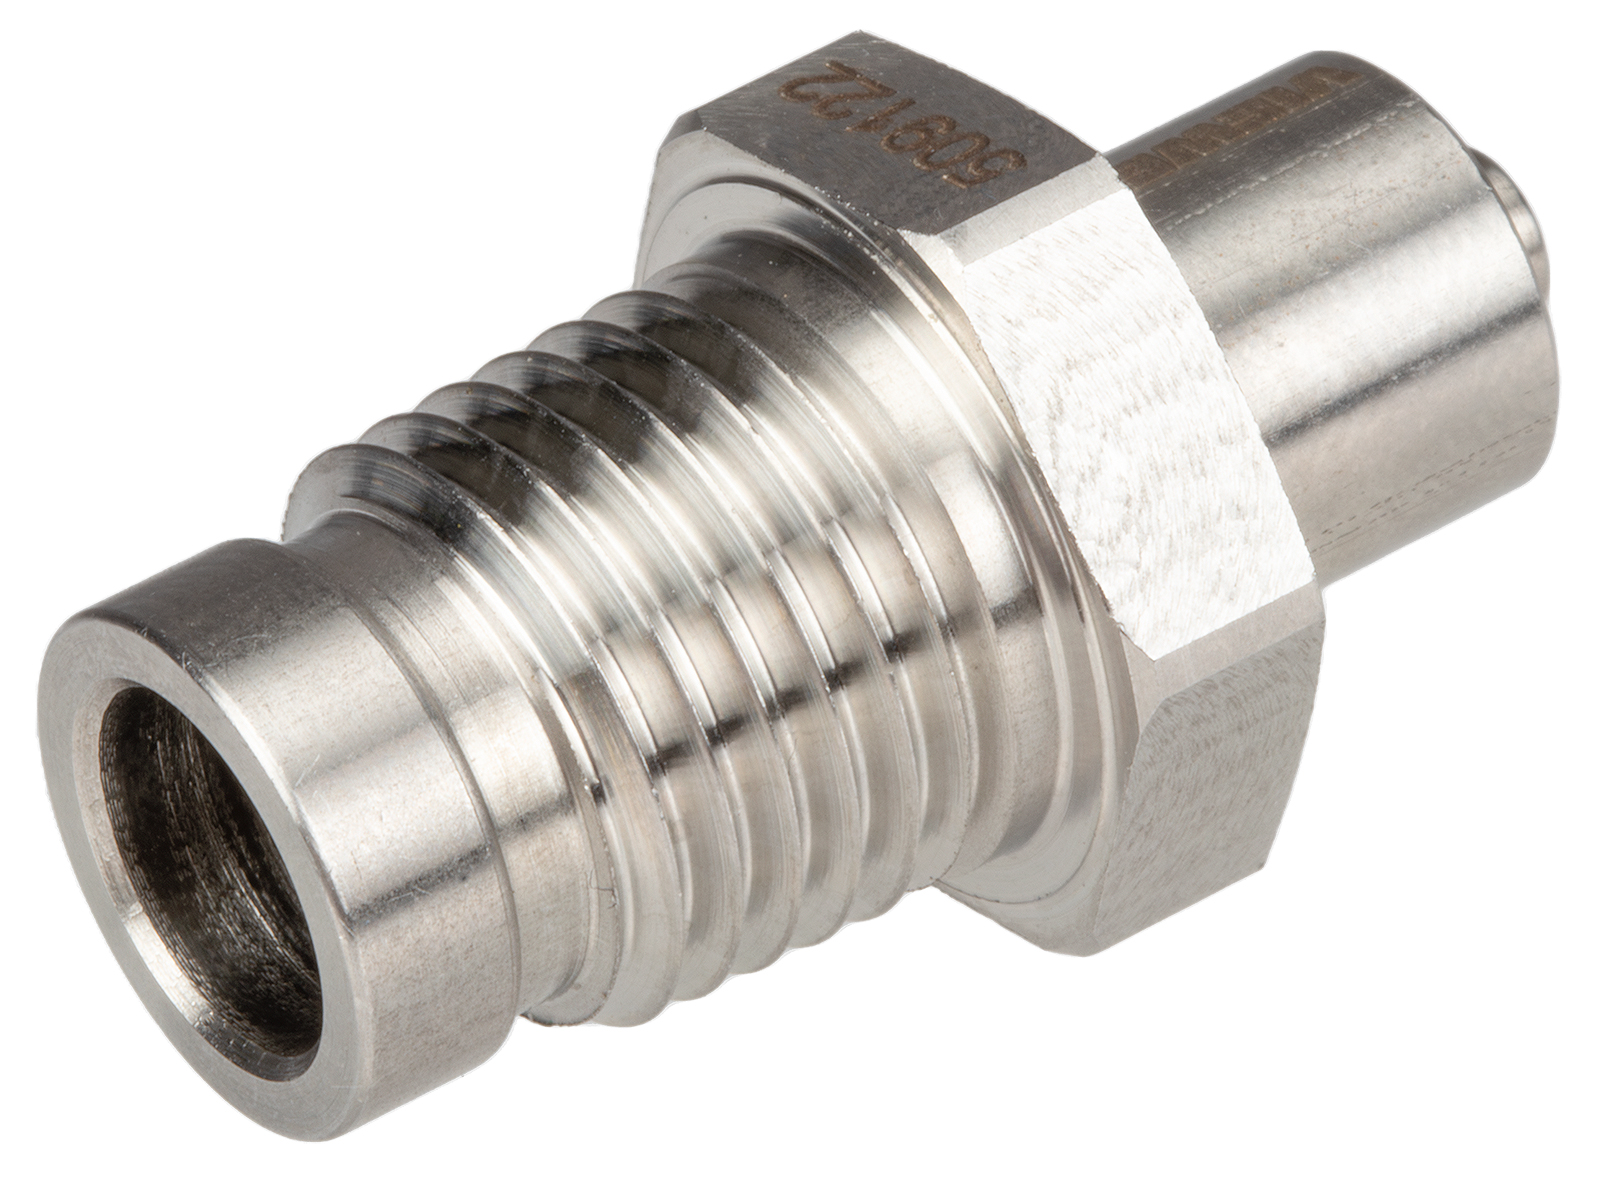 Luer-Lock (male) with NPT-1/4 thread, stainless steel